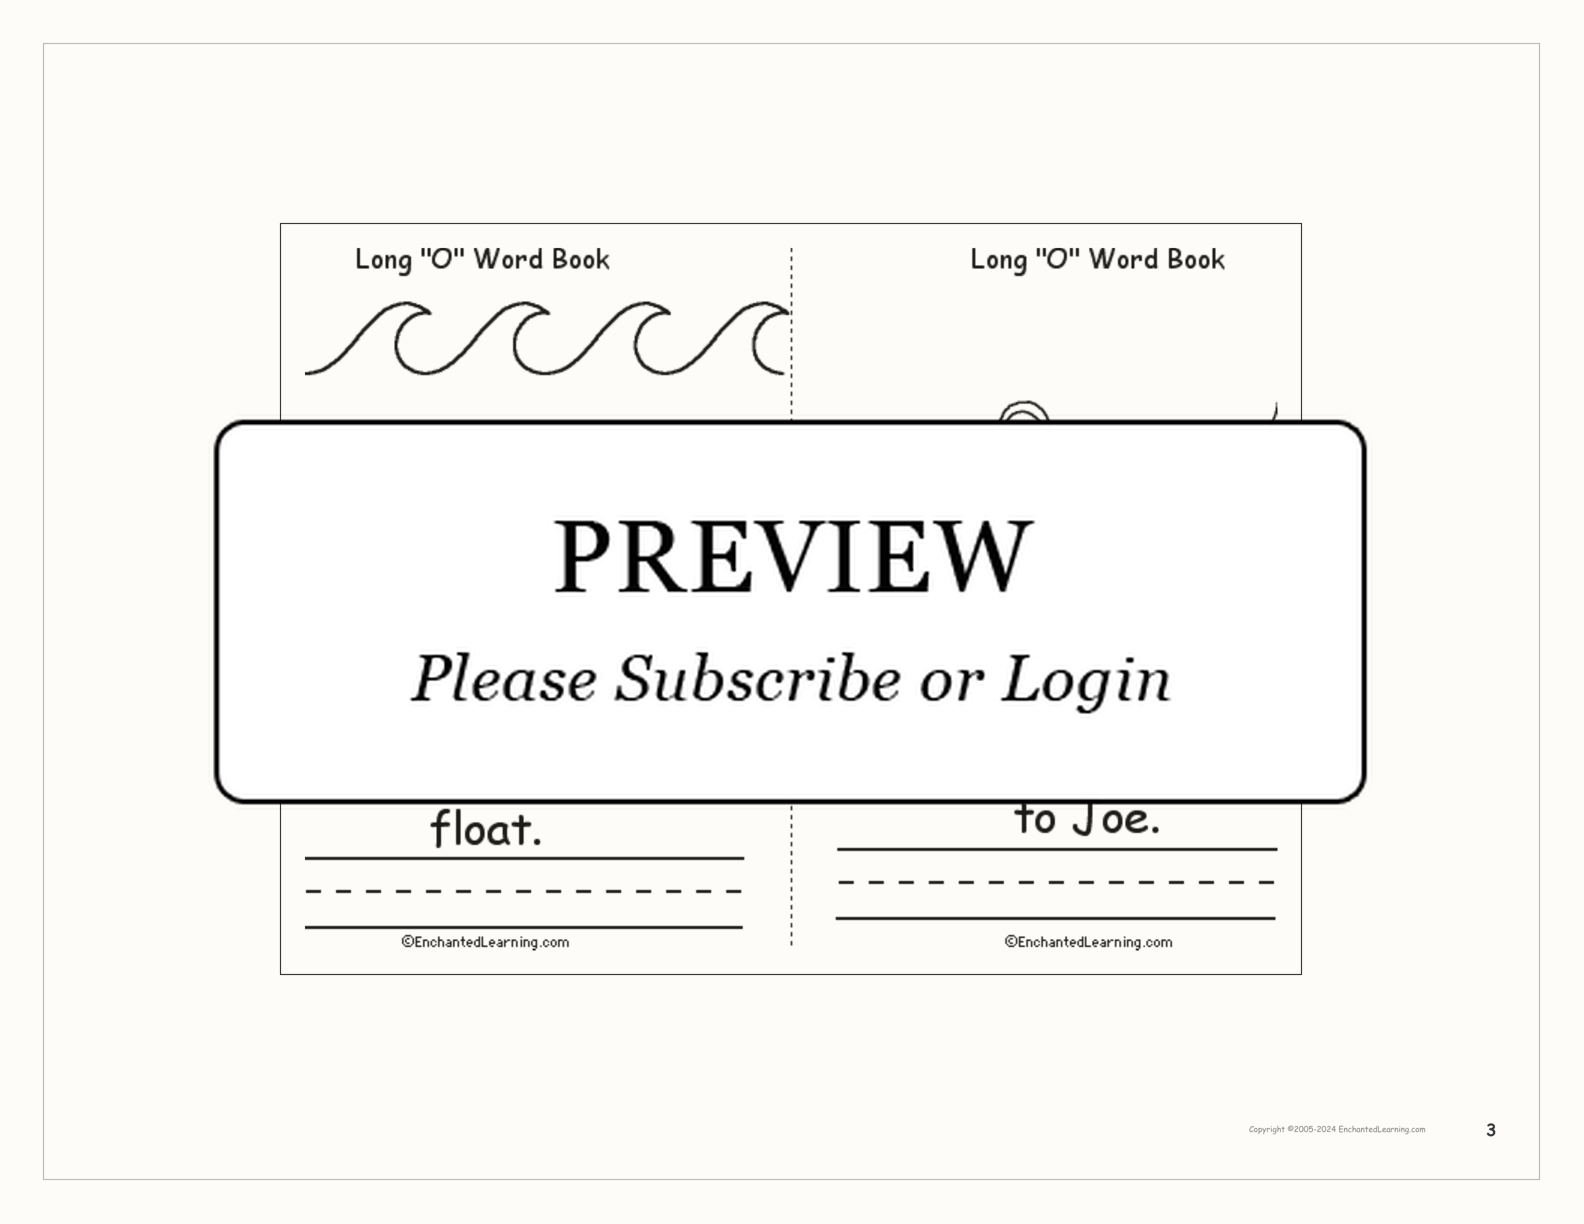 Long 'O' Words Book interactive printout page 3